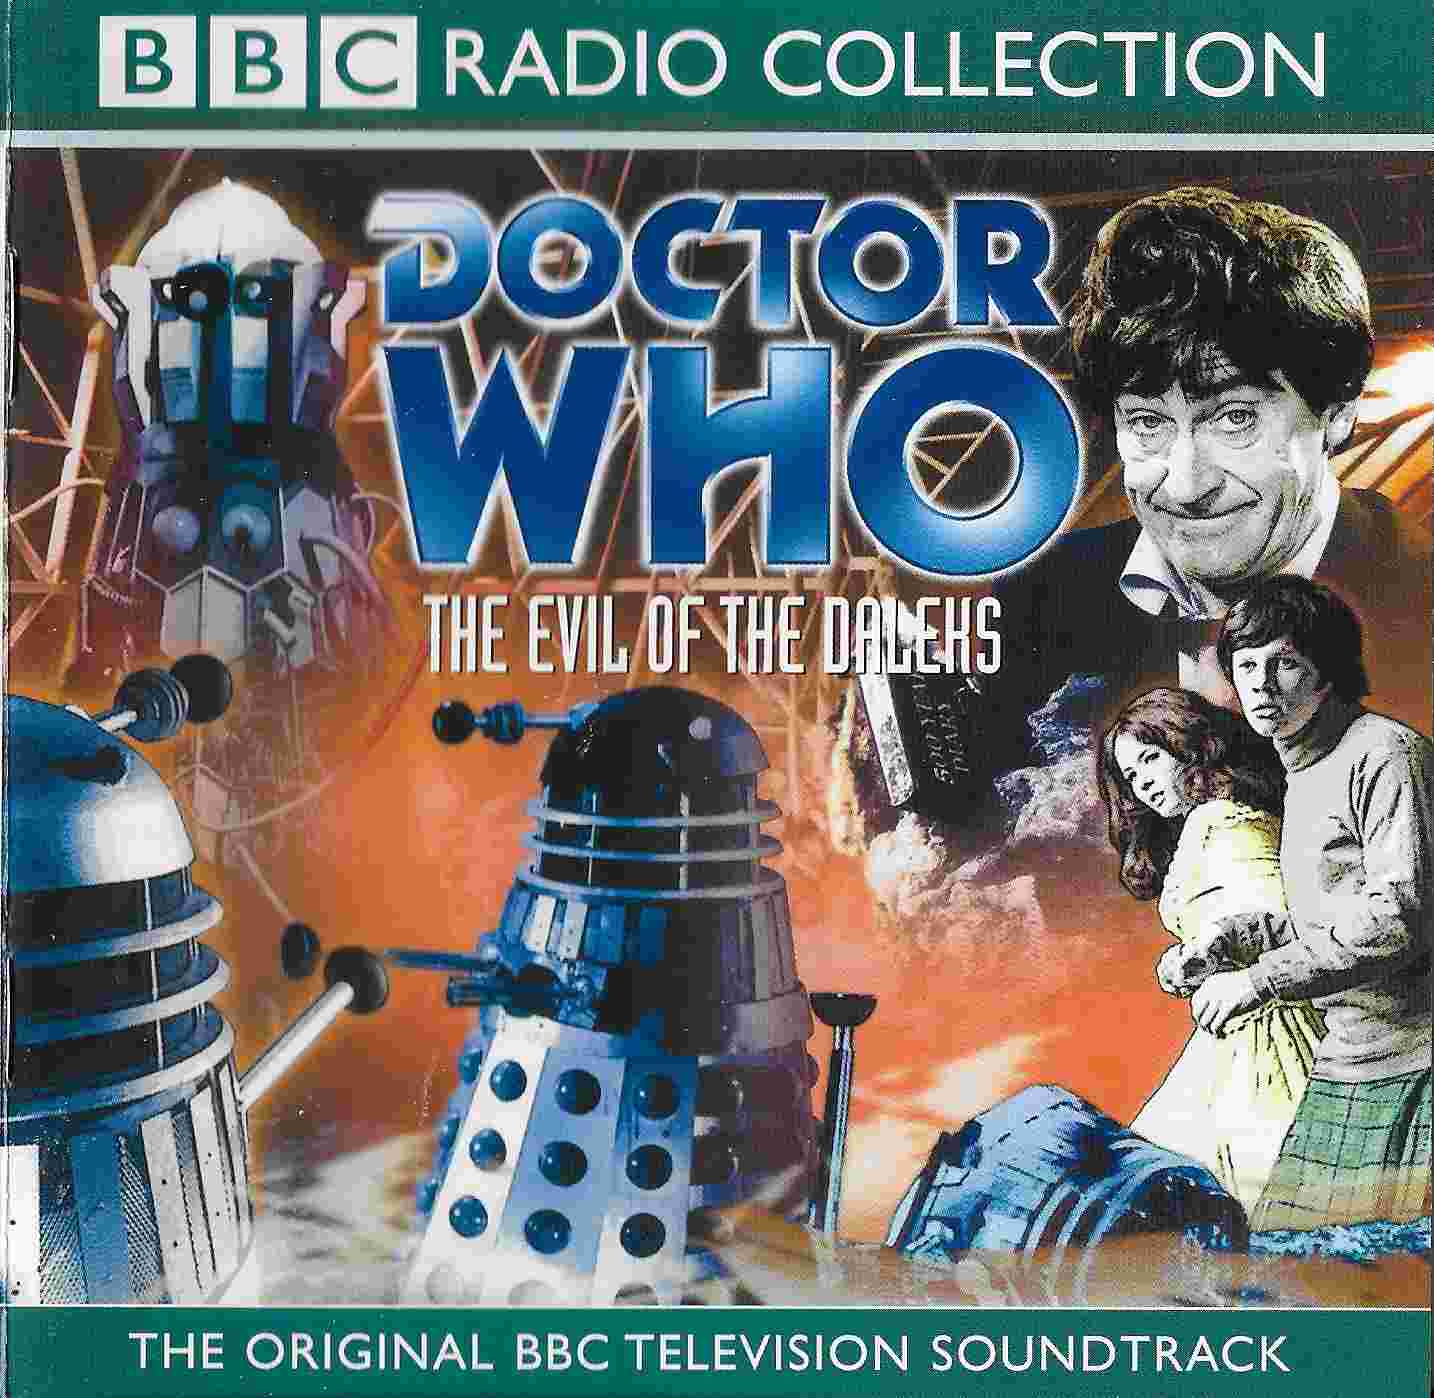 Picture of Doctor Who - The evil of the Daleks by artist David Whitaker from the BBC cds - Records and Tapes library